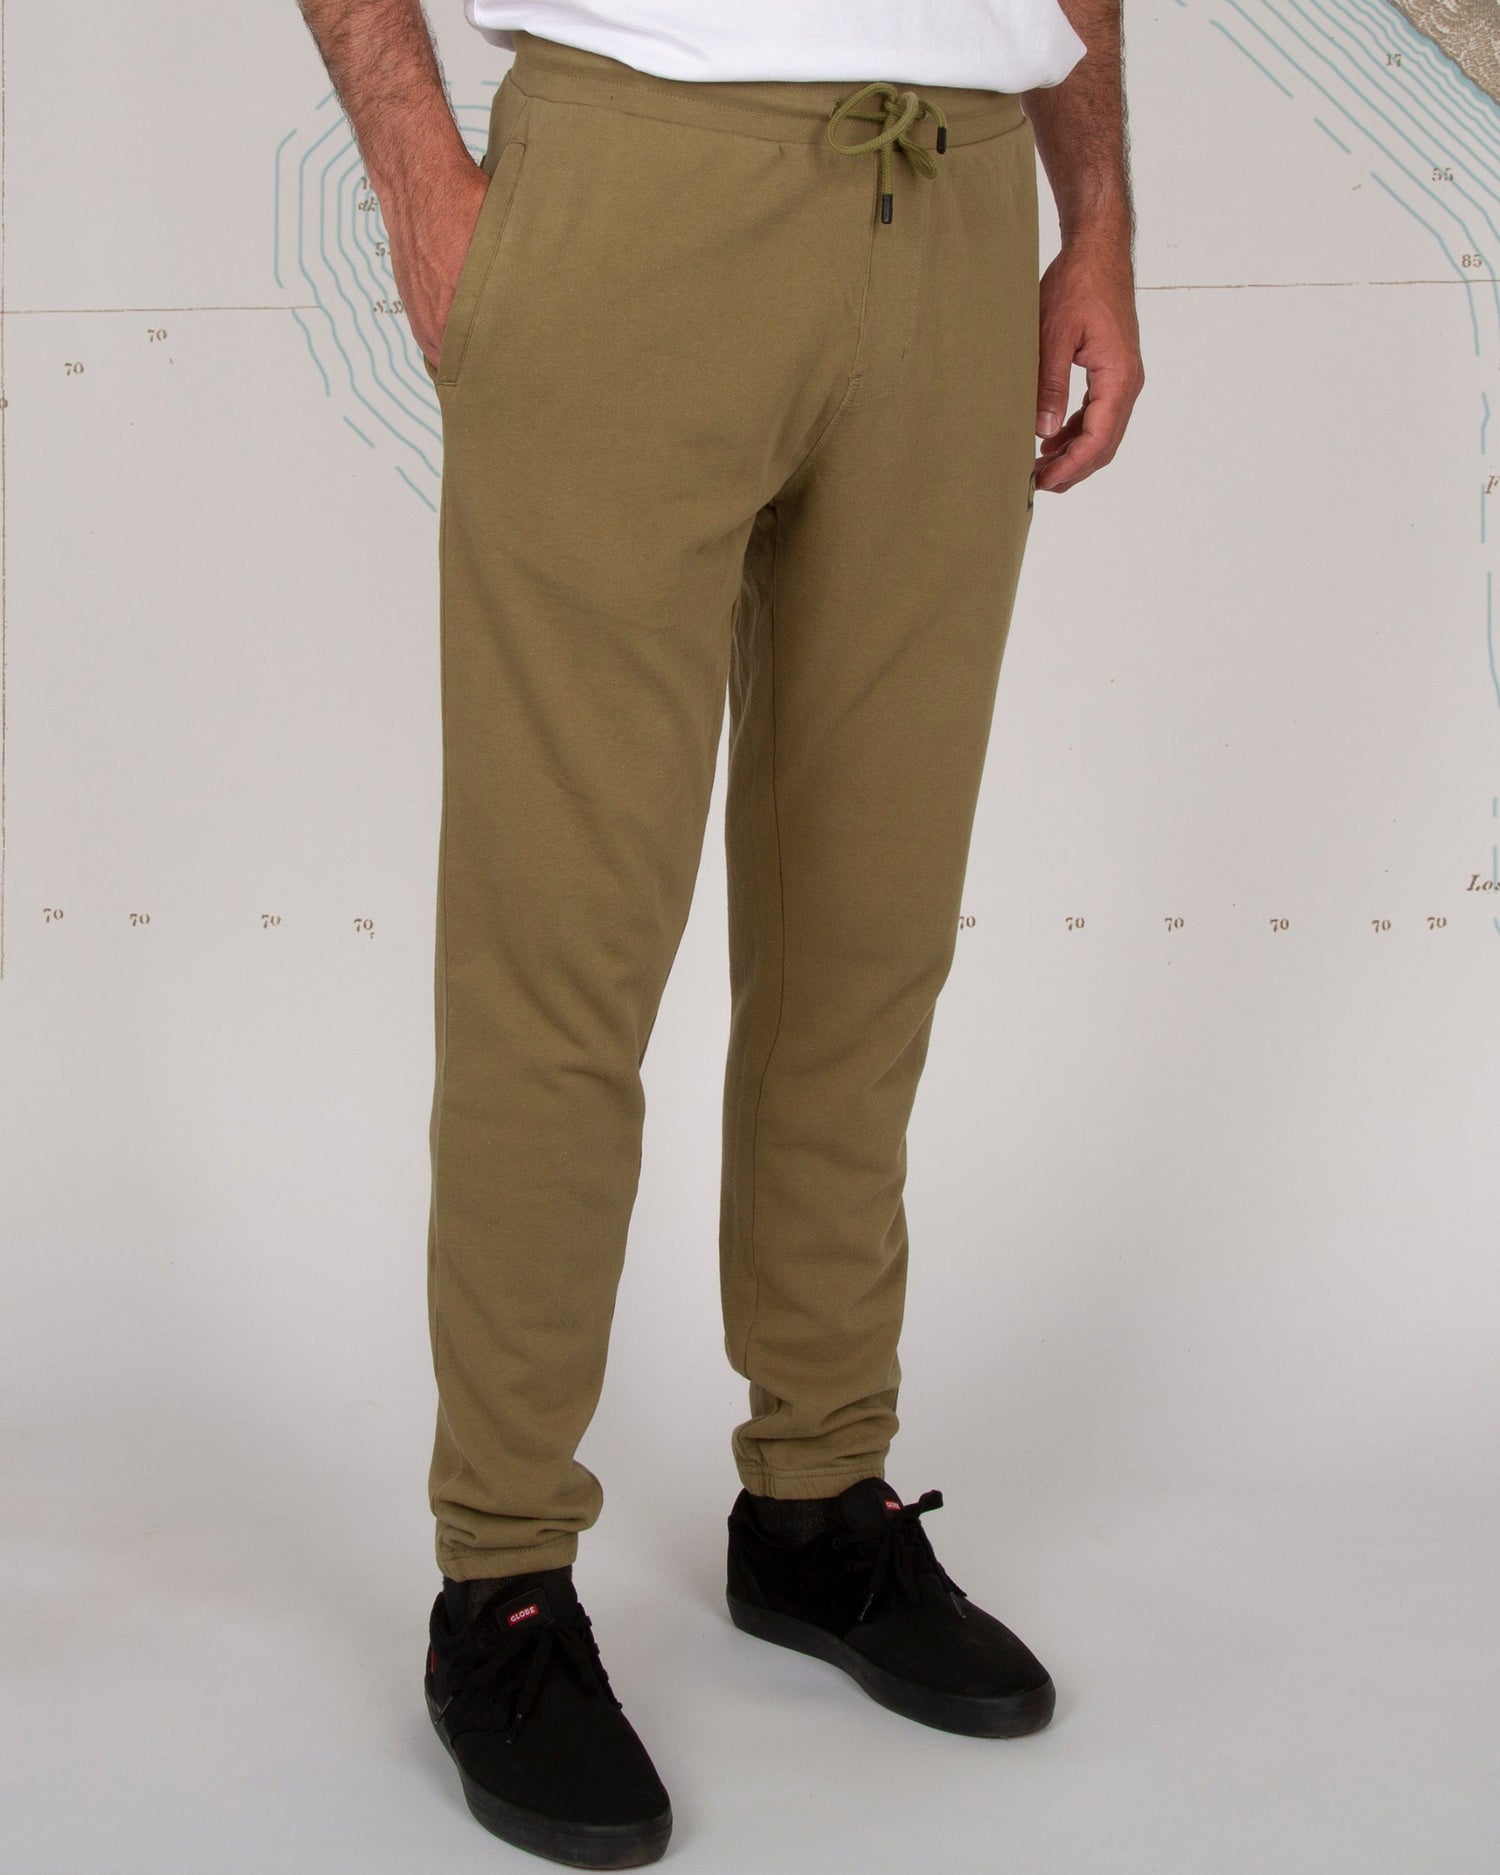 RESIN PIGMENT SWEATPANT - Dusty Olive